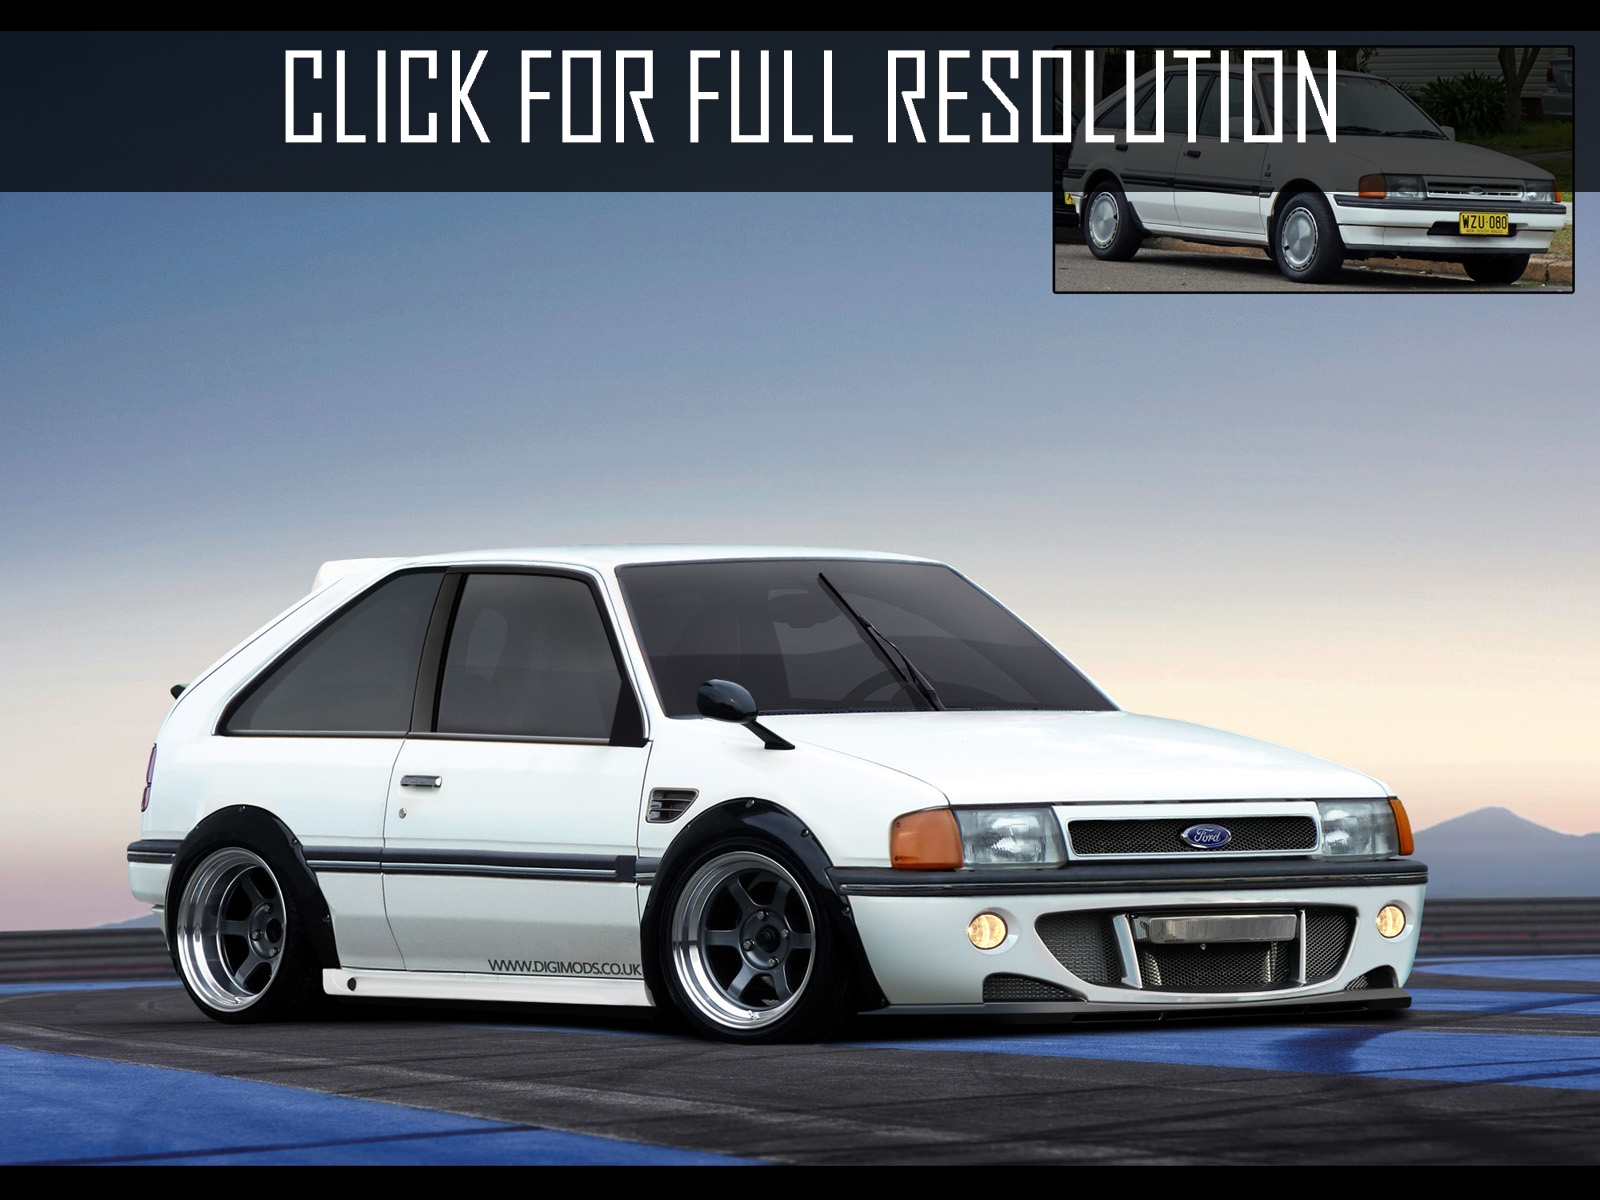 Ford Laser Modified